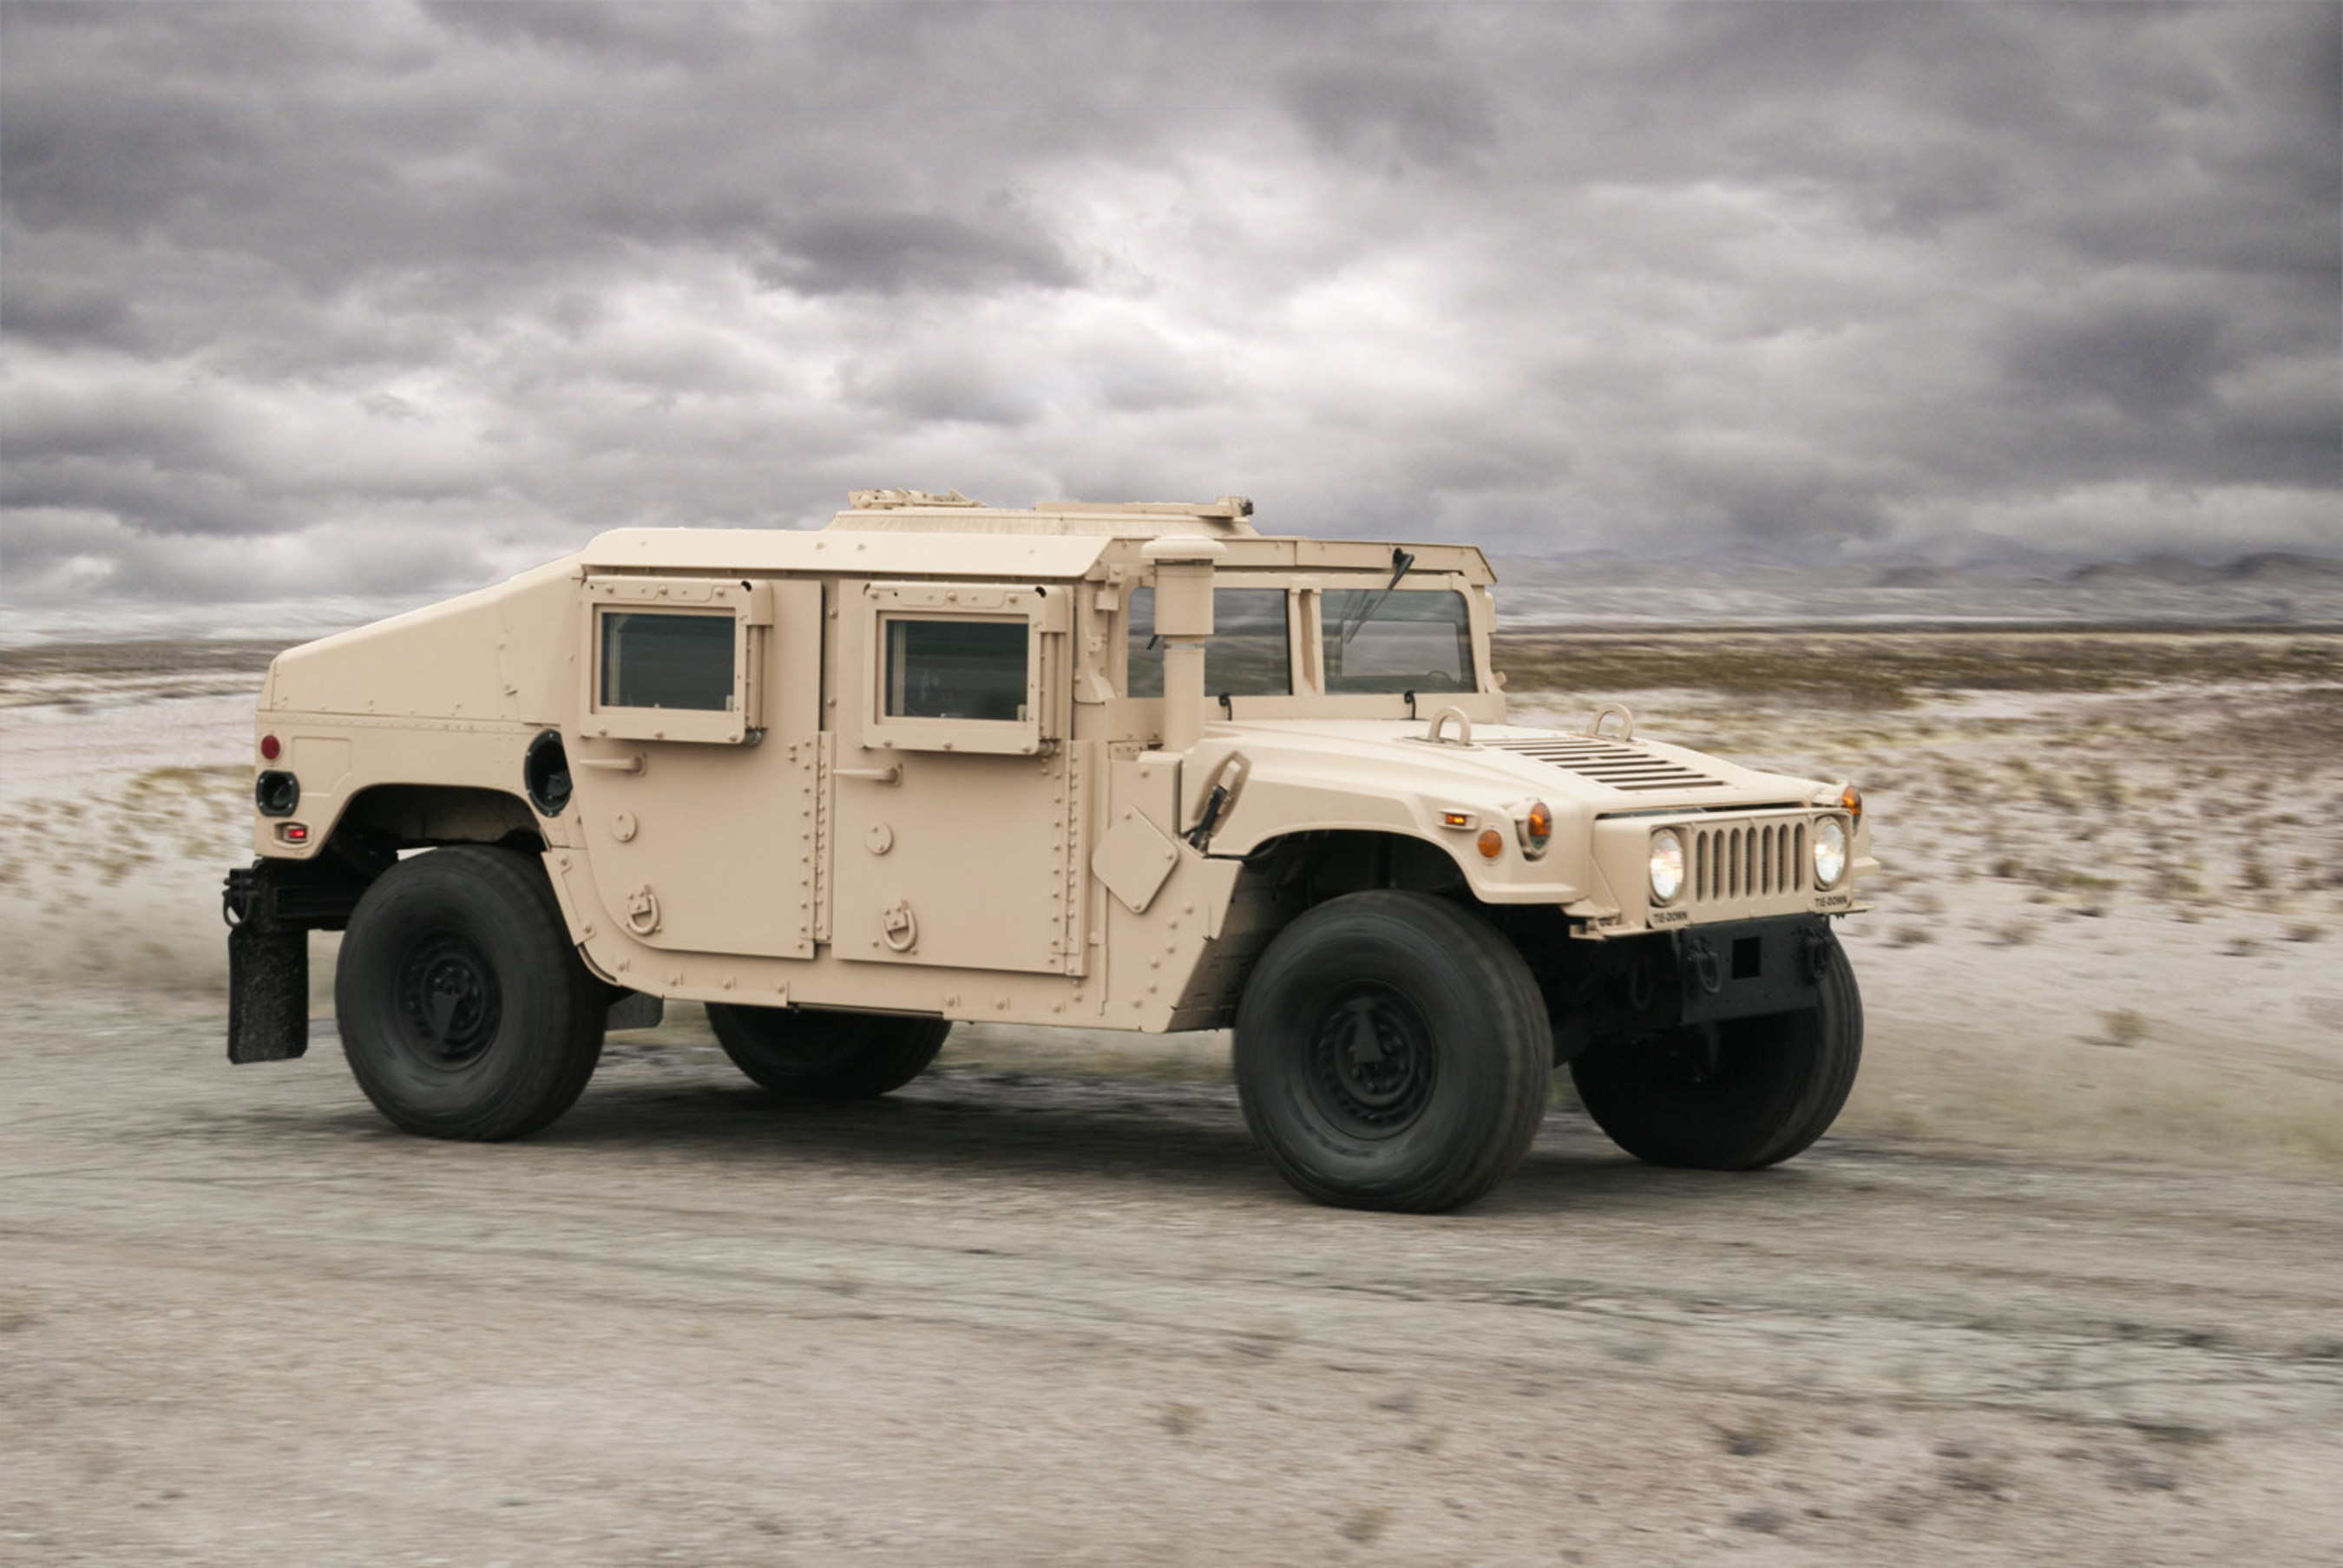 AM General has been awarded a $356,213,318 contract to manufacture and deliver 1,673 HMMWVs to the U.S. Government for further delivery to the Afghanistan National Army and Police. Under the terms of the contract, the company will manufacture and deliver 1,259 -M1151A1B1 HMMWVs and 414 - M1152 A1B2 HMMWV models.